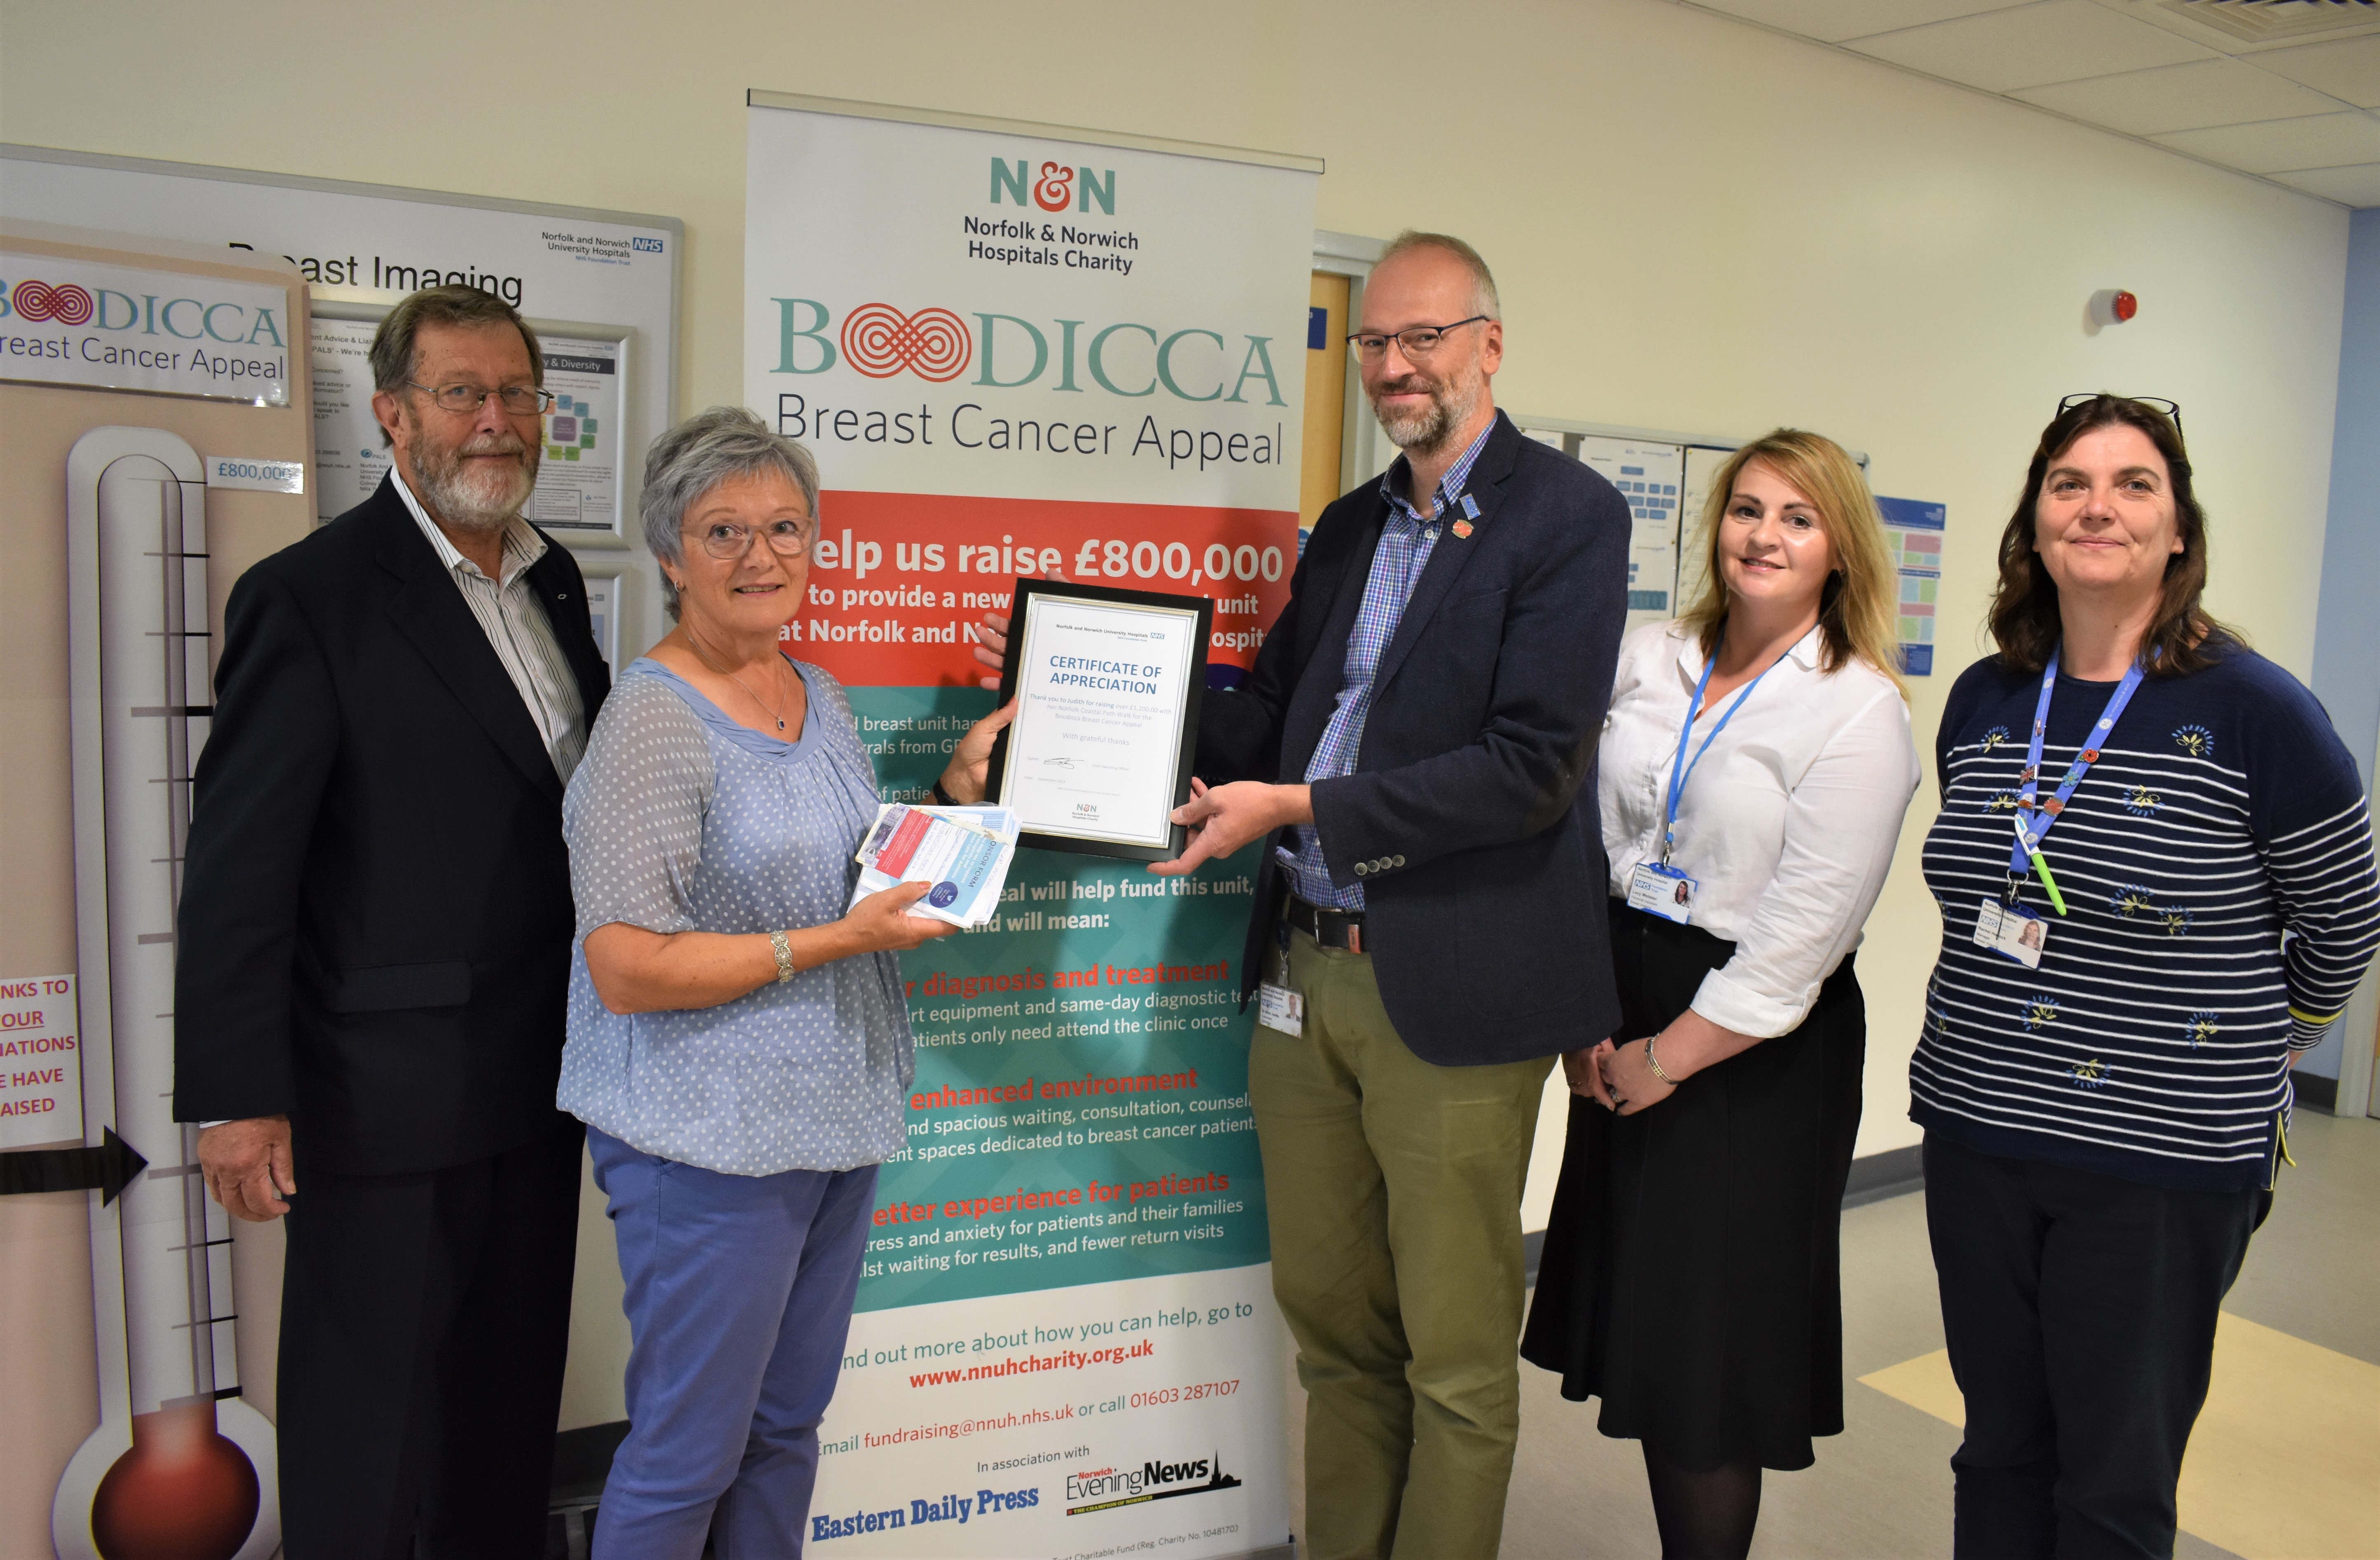 Director of the NNUH Breast Imaging Unit Dr Arne Juette, accompanied by members of his team, presents a Certificate of Appreciation to Judith Marney, and husband John.